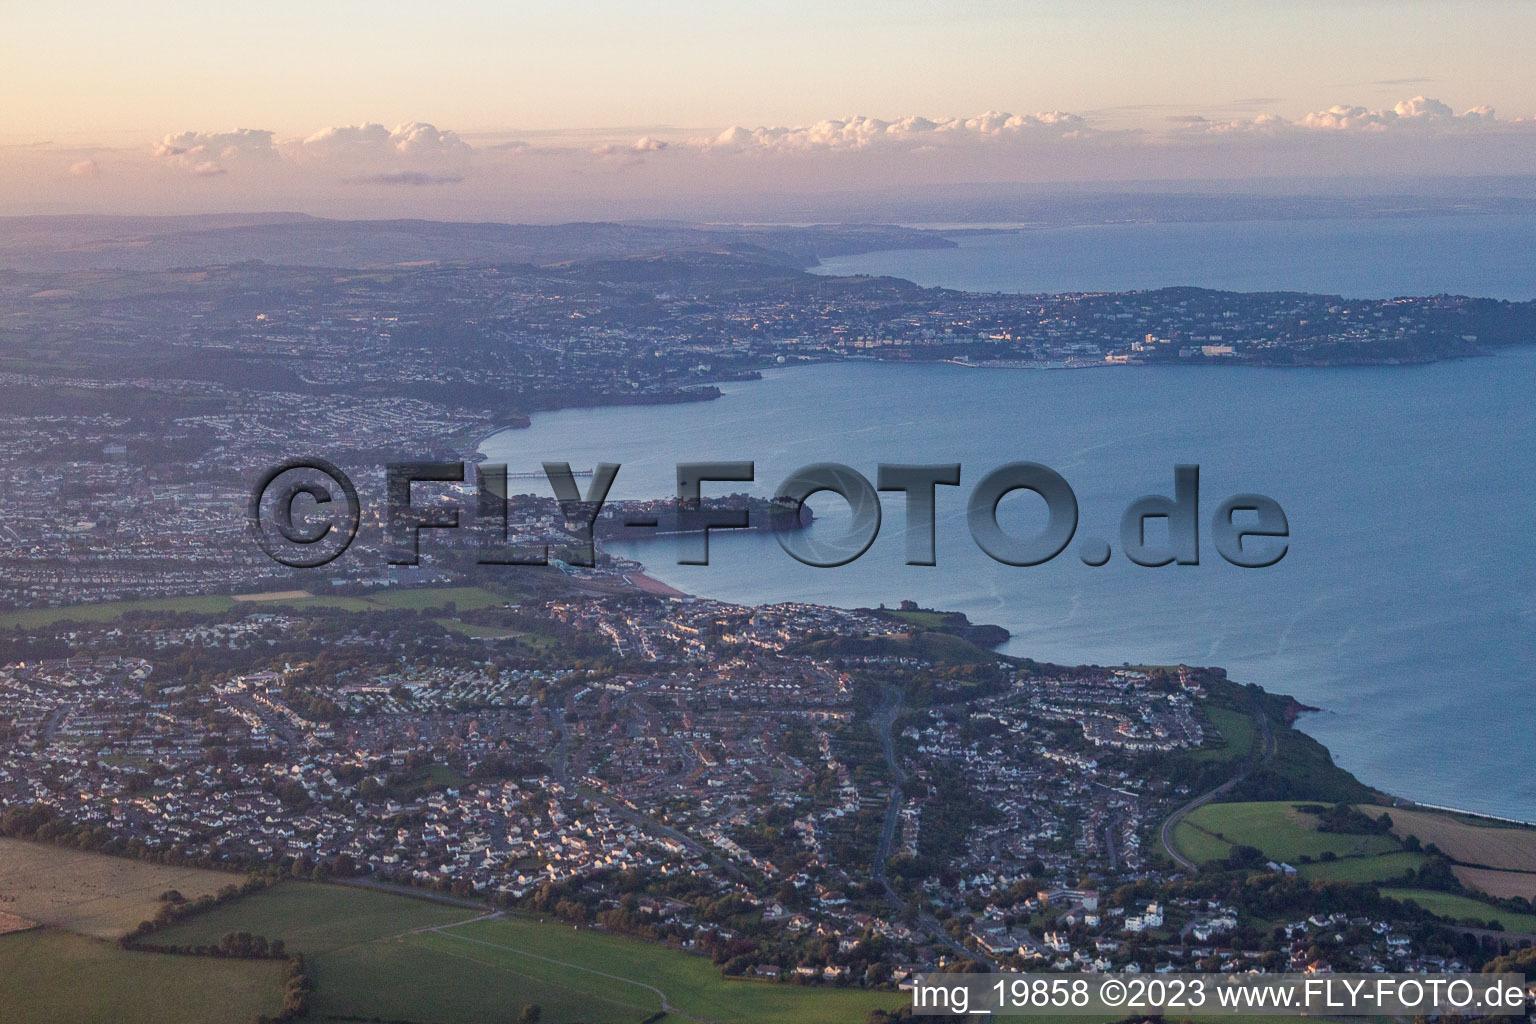 Aerial photograpy of Galmpton in the state England, Great Britain